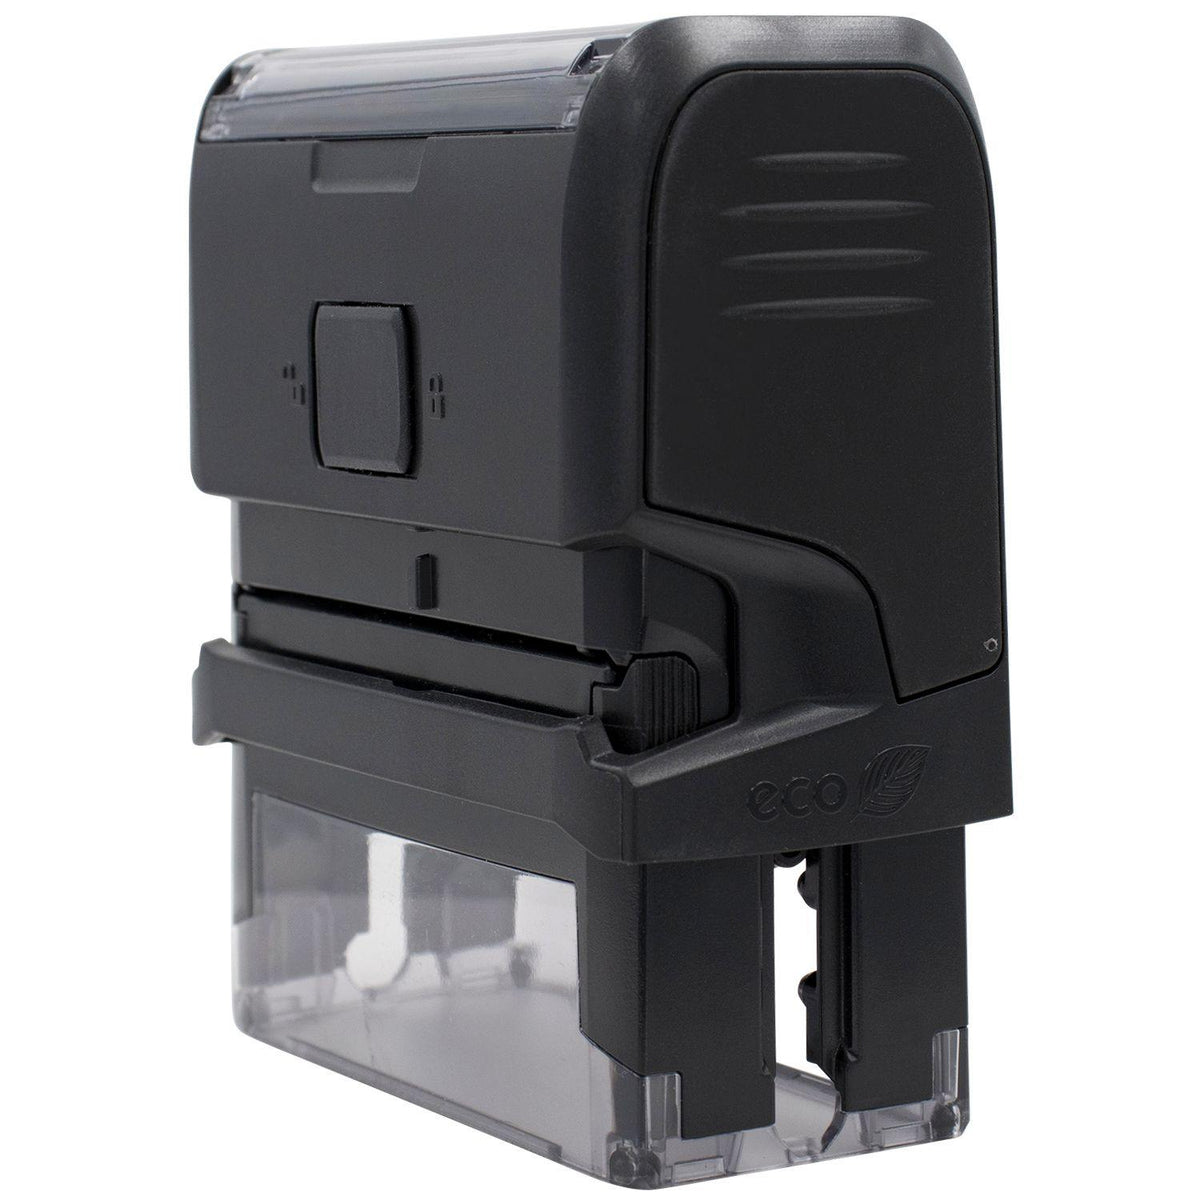 Side View of Large Self Inking Book Stamp at an Angle